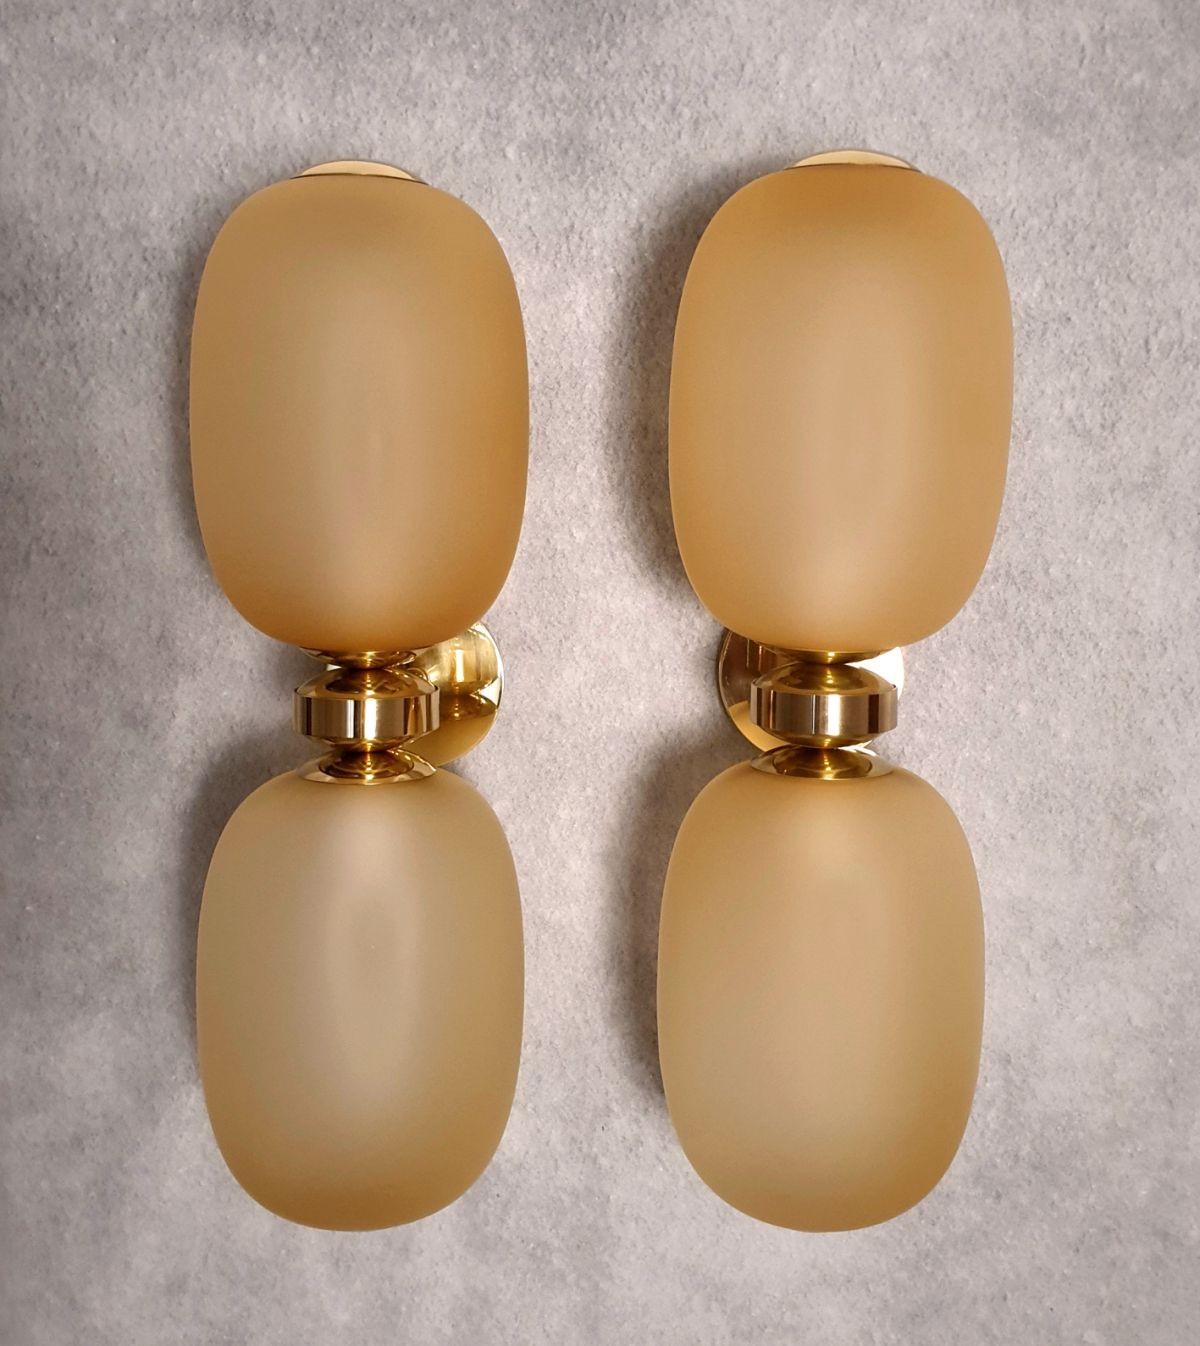 Pair of Mid-Century-Modern Murano glass and brass sconces, Barovier & Toso style, Italy, 1980s.
Two pairs of sconces available. Priced and sold by pair.
Select 2 in the menu if you are considering the 2 pairs, or set of four sconces.
Each sconce has